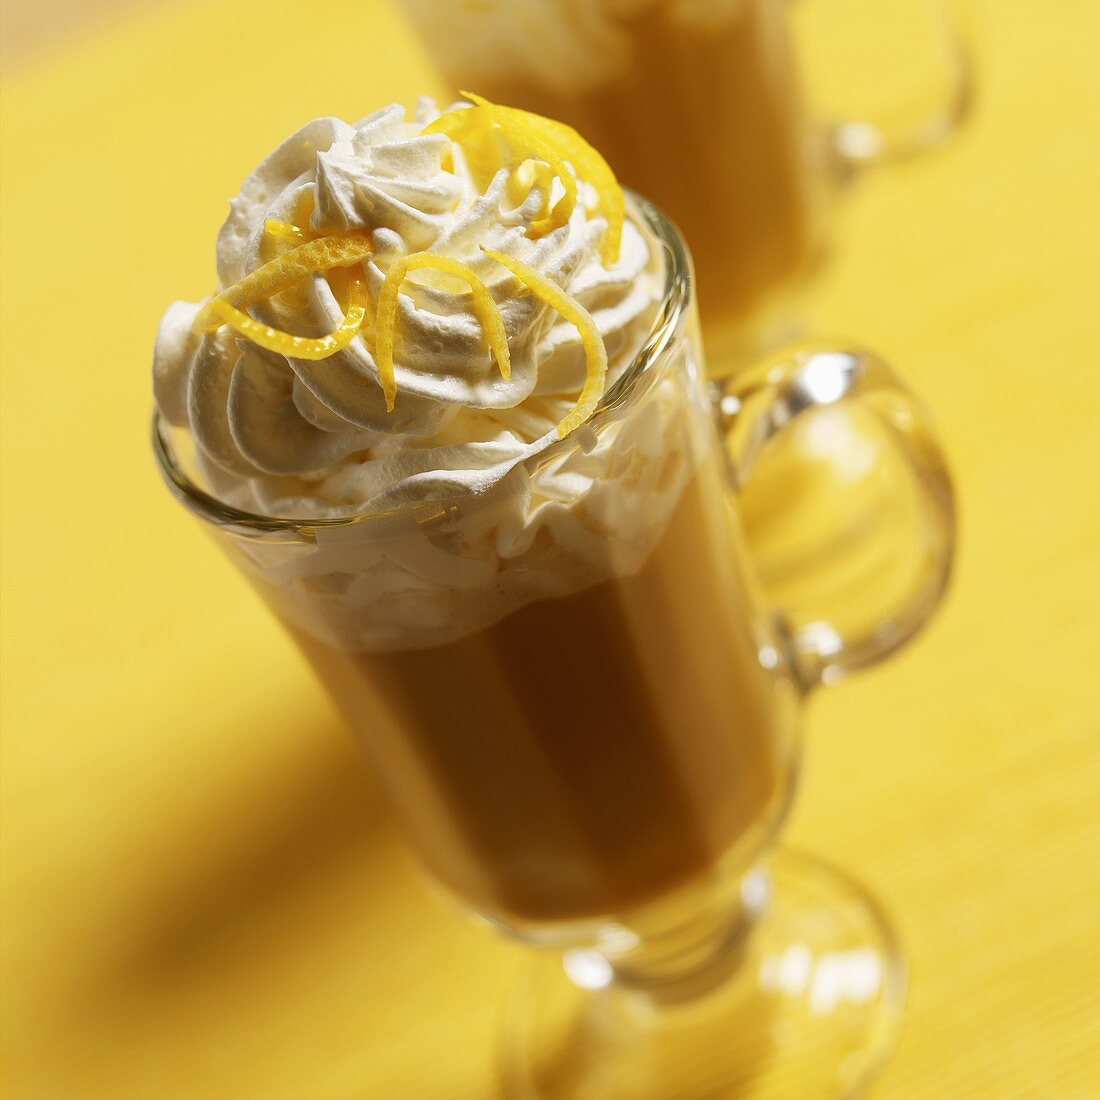 Coffee drink with cream topping and lemon zest